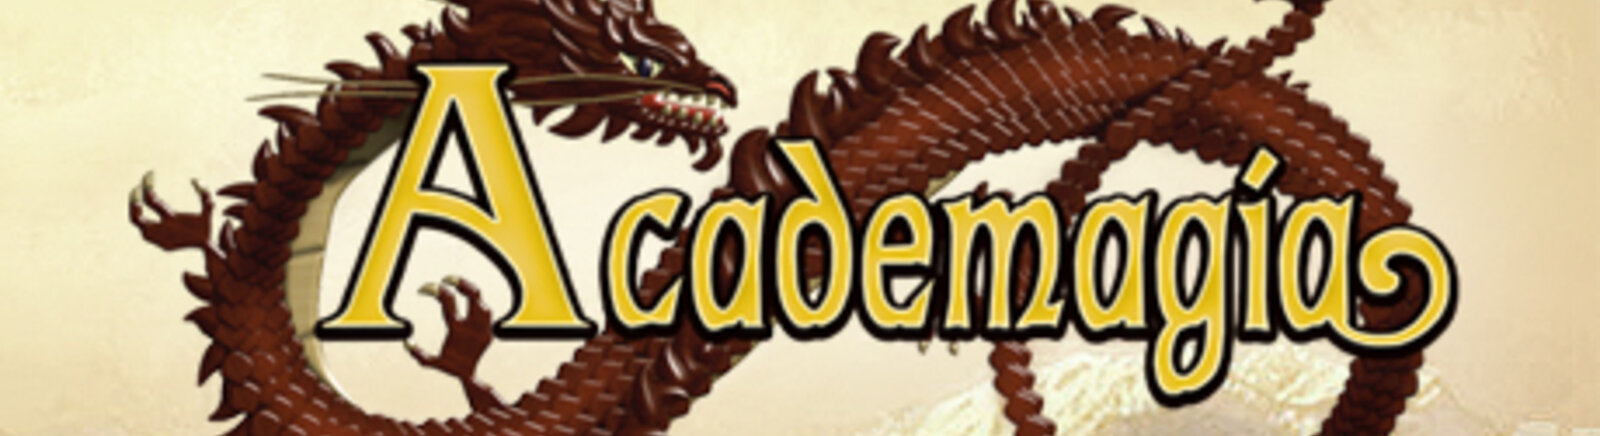 Academagia: The Making of Mages no Steam